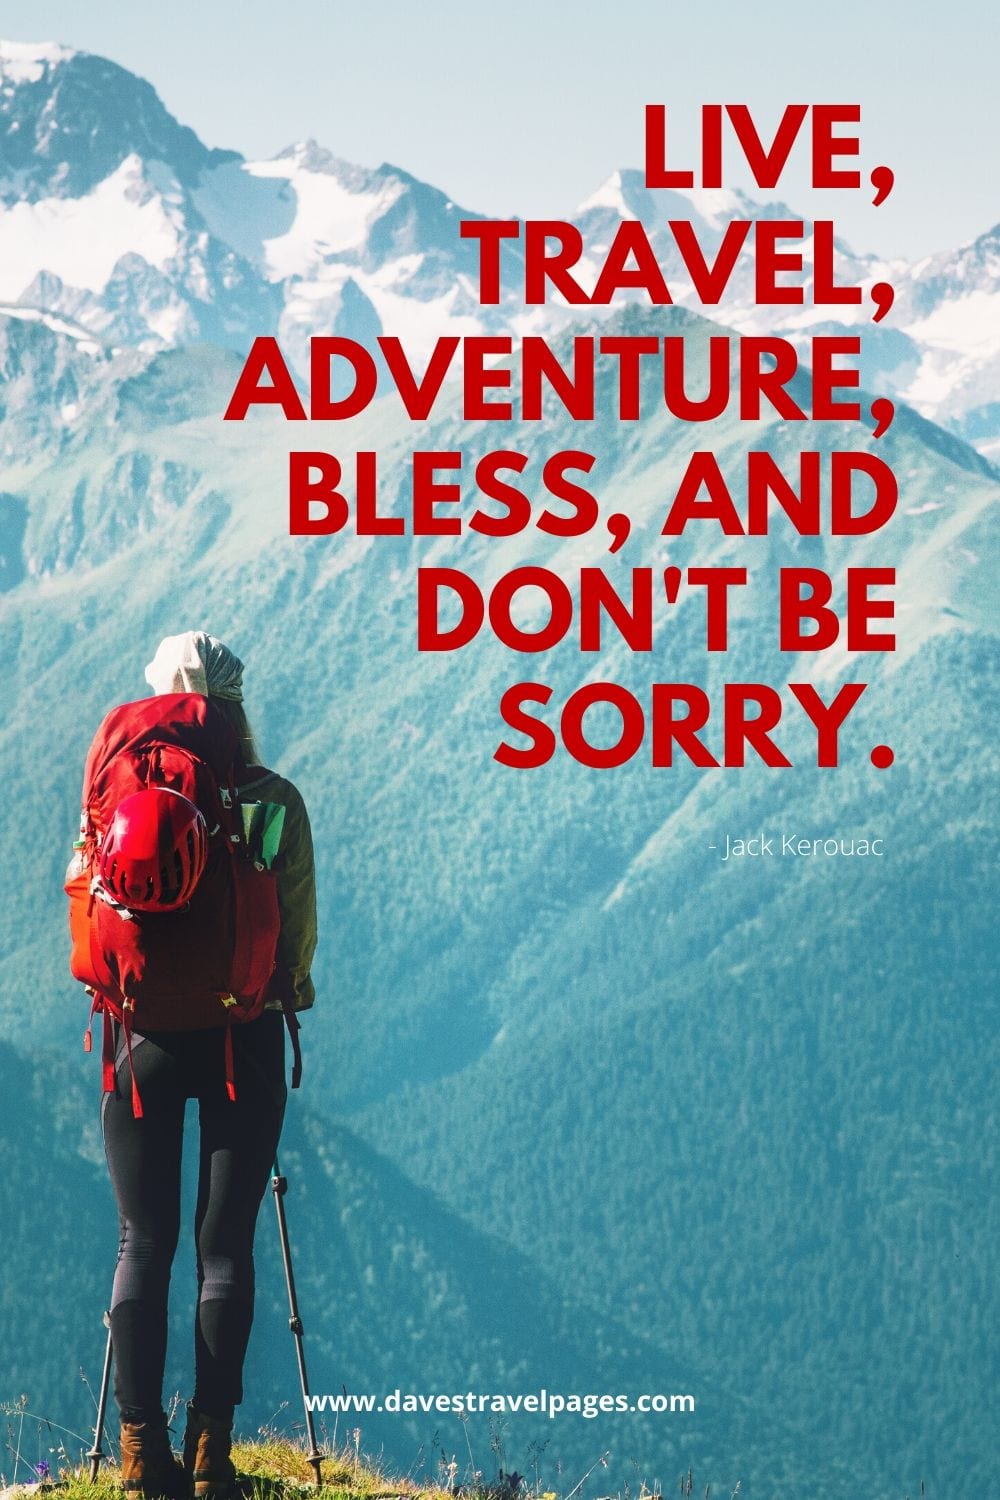 So shut up, live, travel, adventure, bless and don't be sorry - Jack Kerouac Quote about a life of adventure